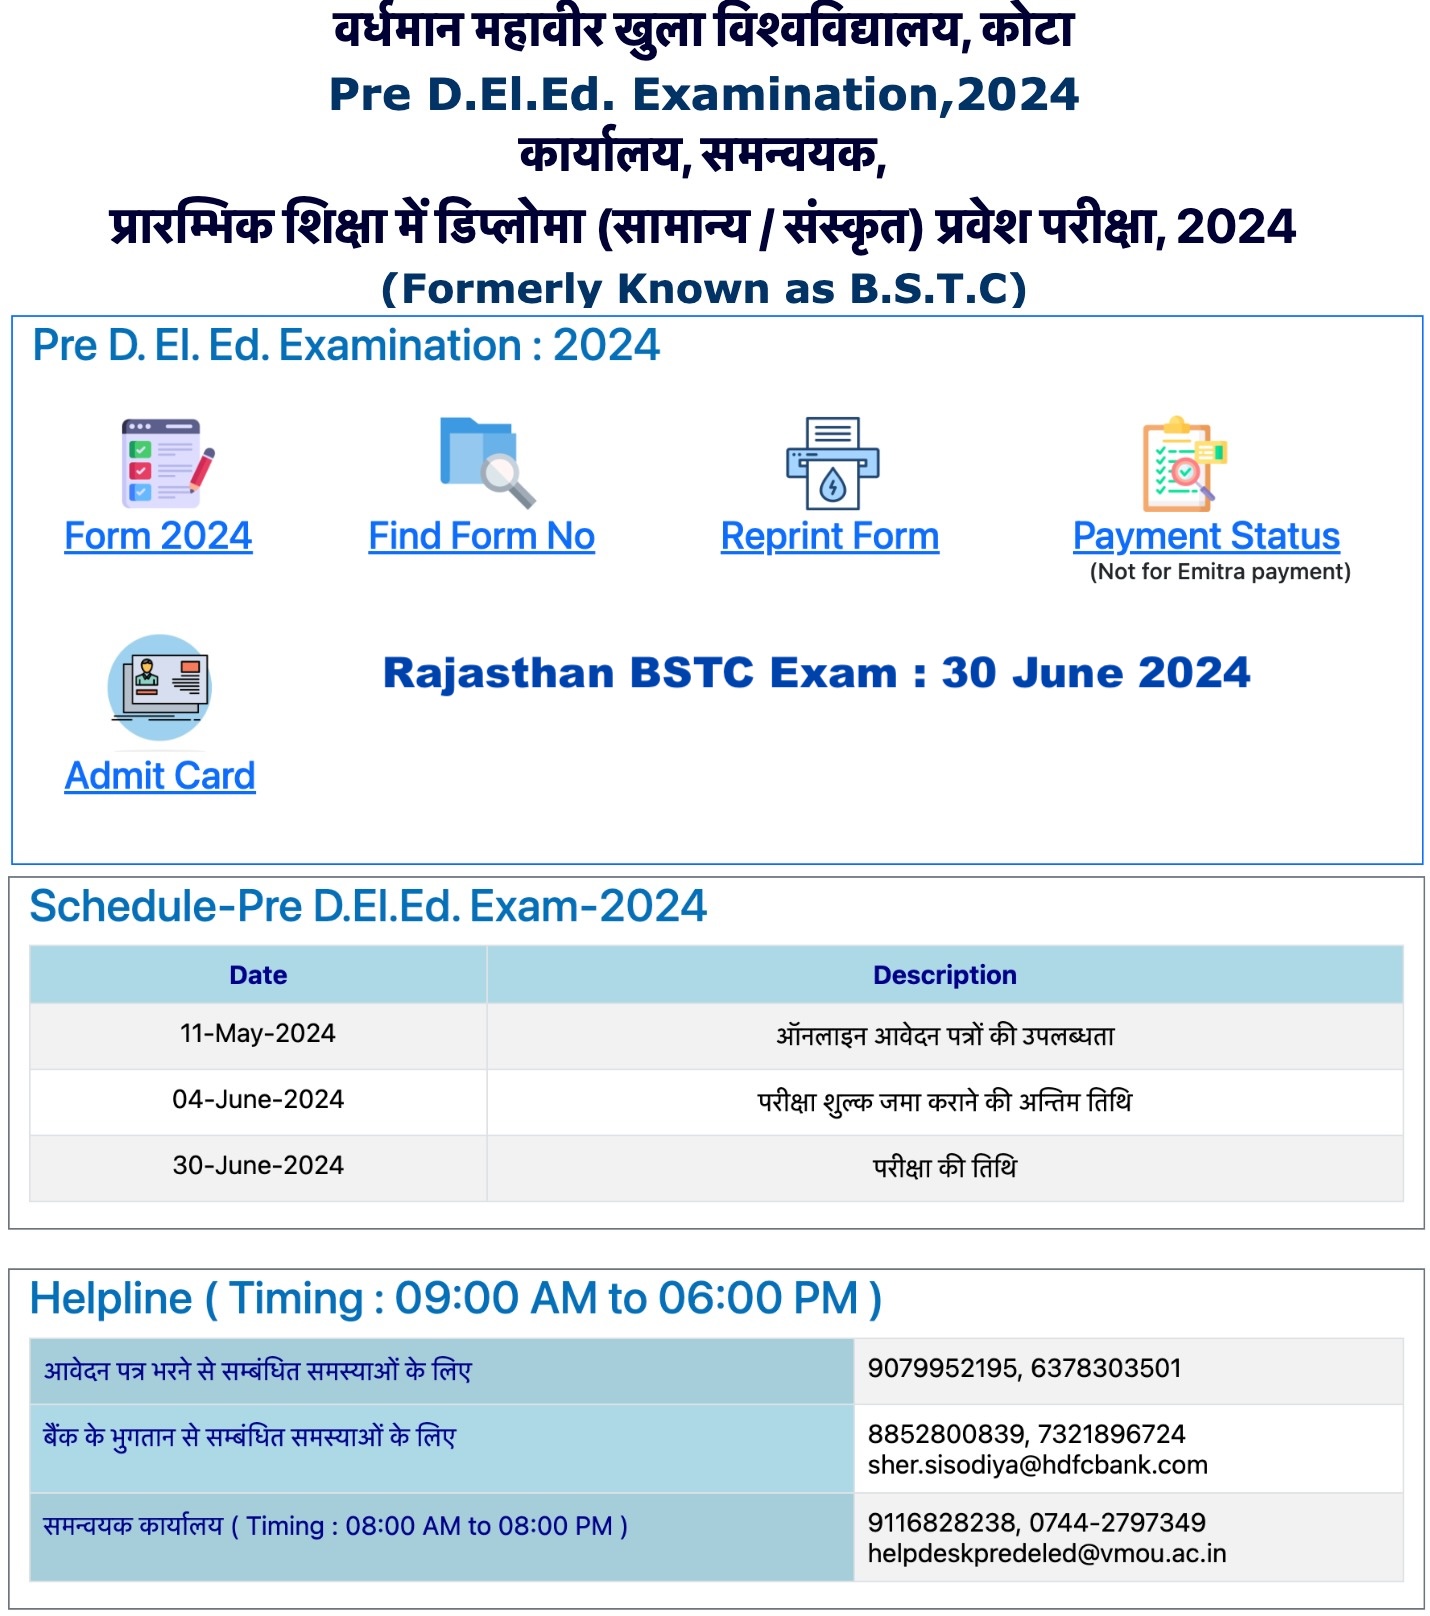 Rajasthan BSTC Pre Deled Exam